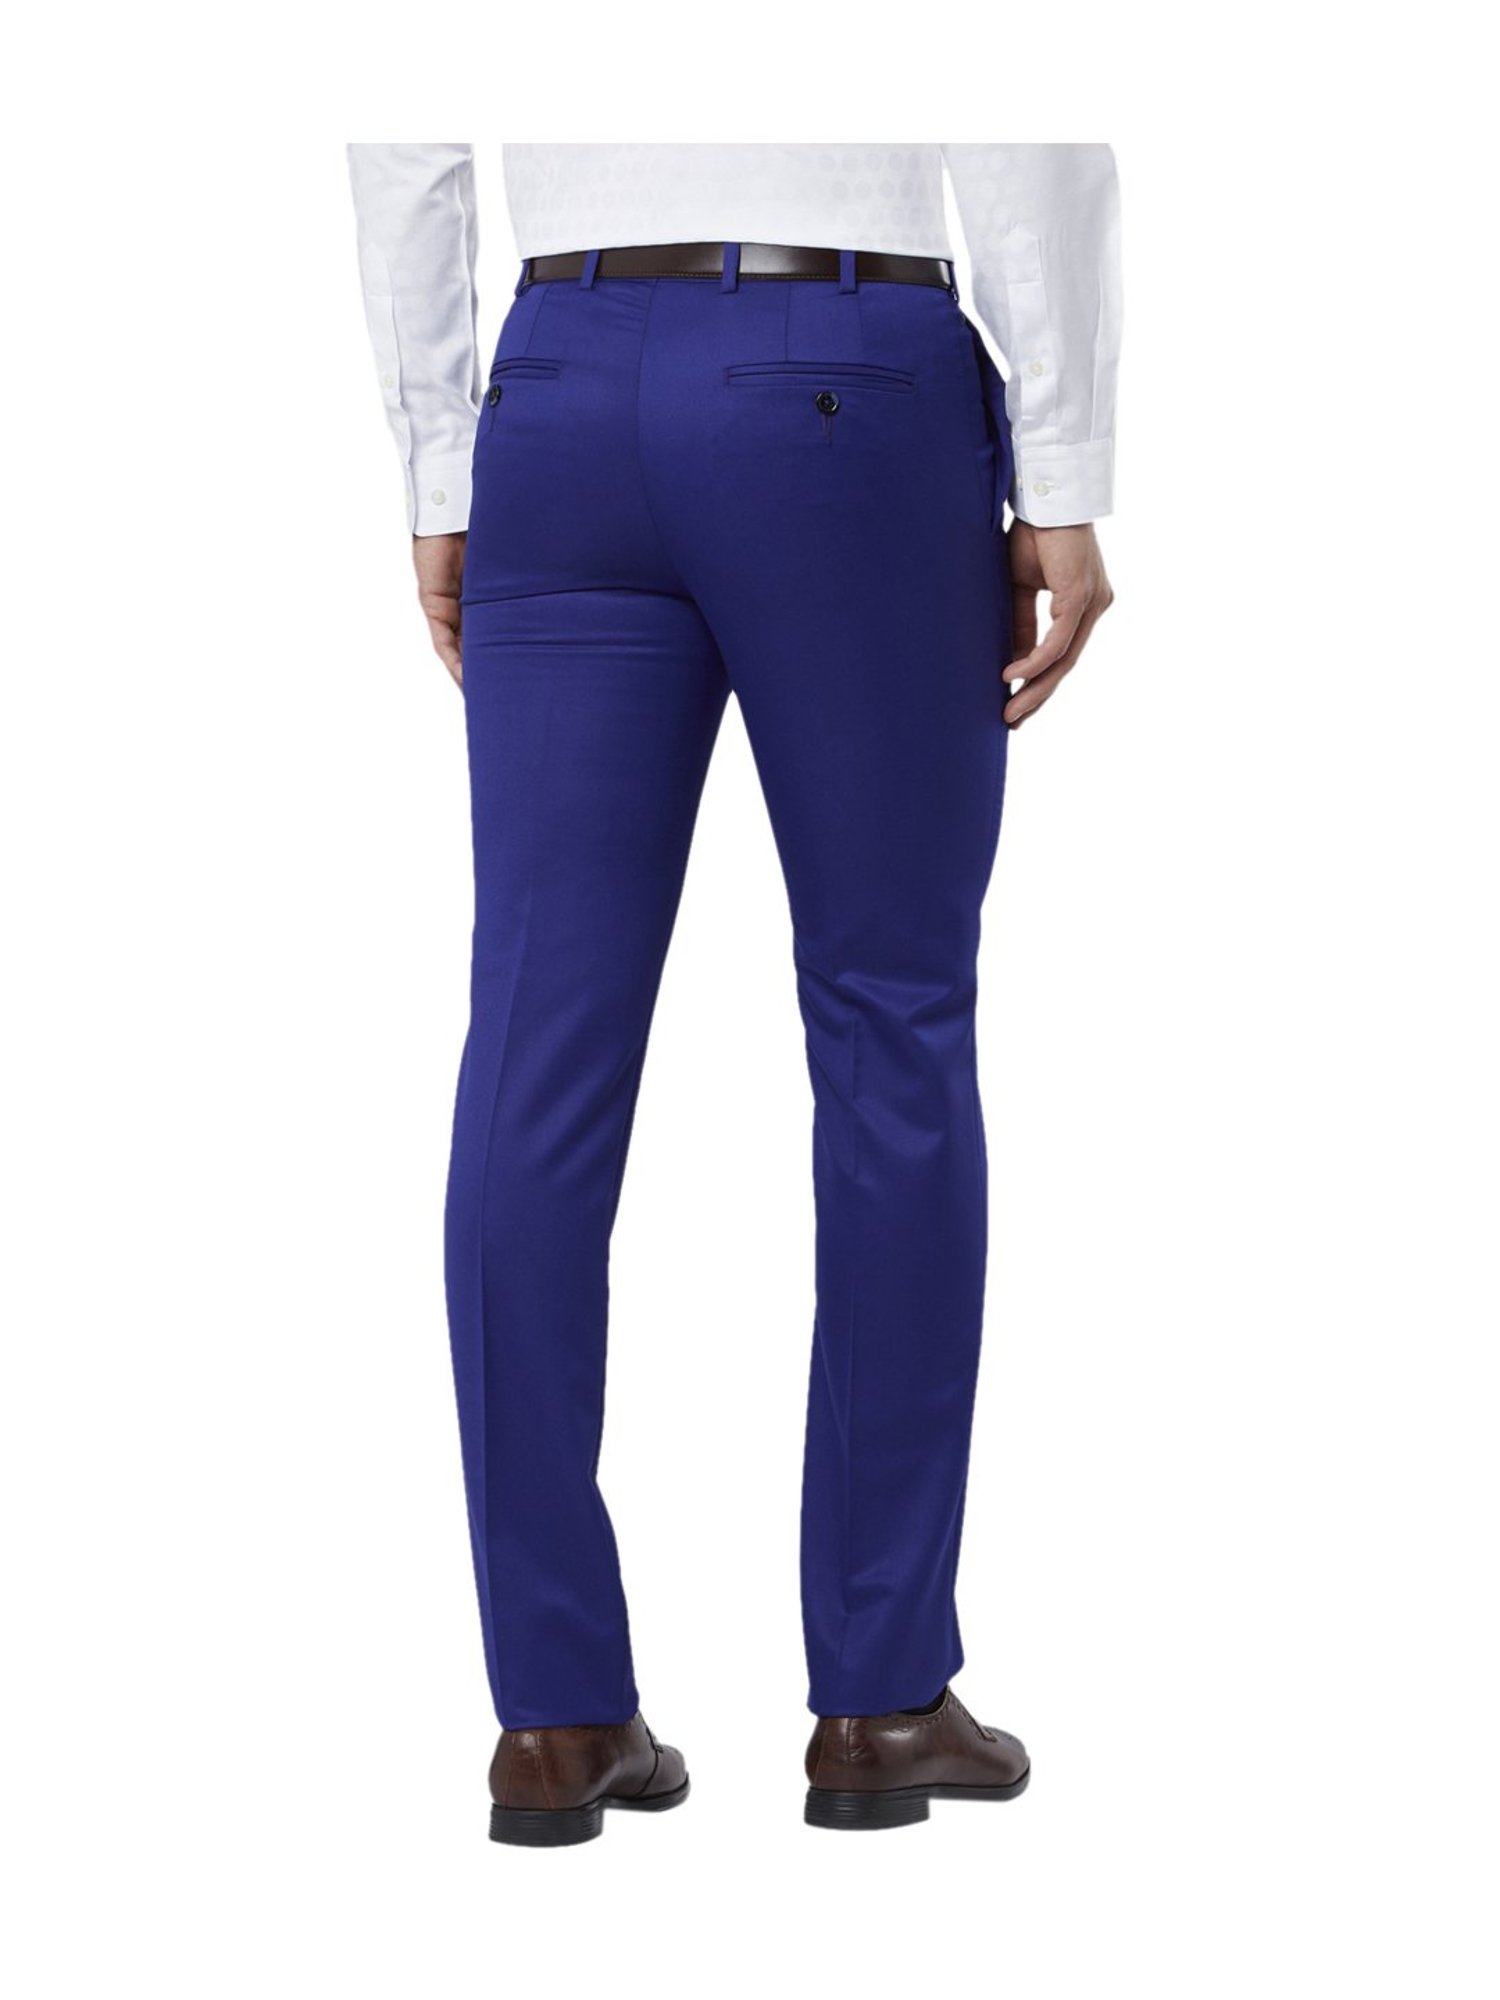 Raymond Grey Checked Slim Fit Formal Trouser  Buy Raymond Grey Checked  Slim Fit Formal Trouser online in India